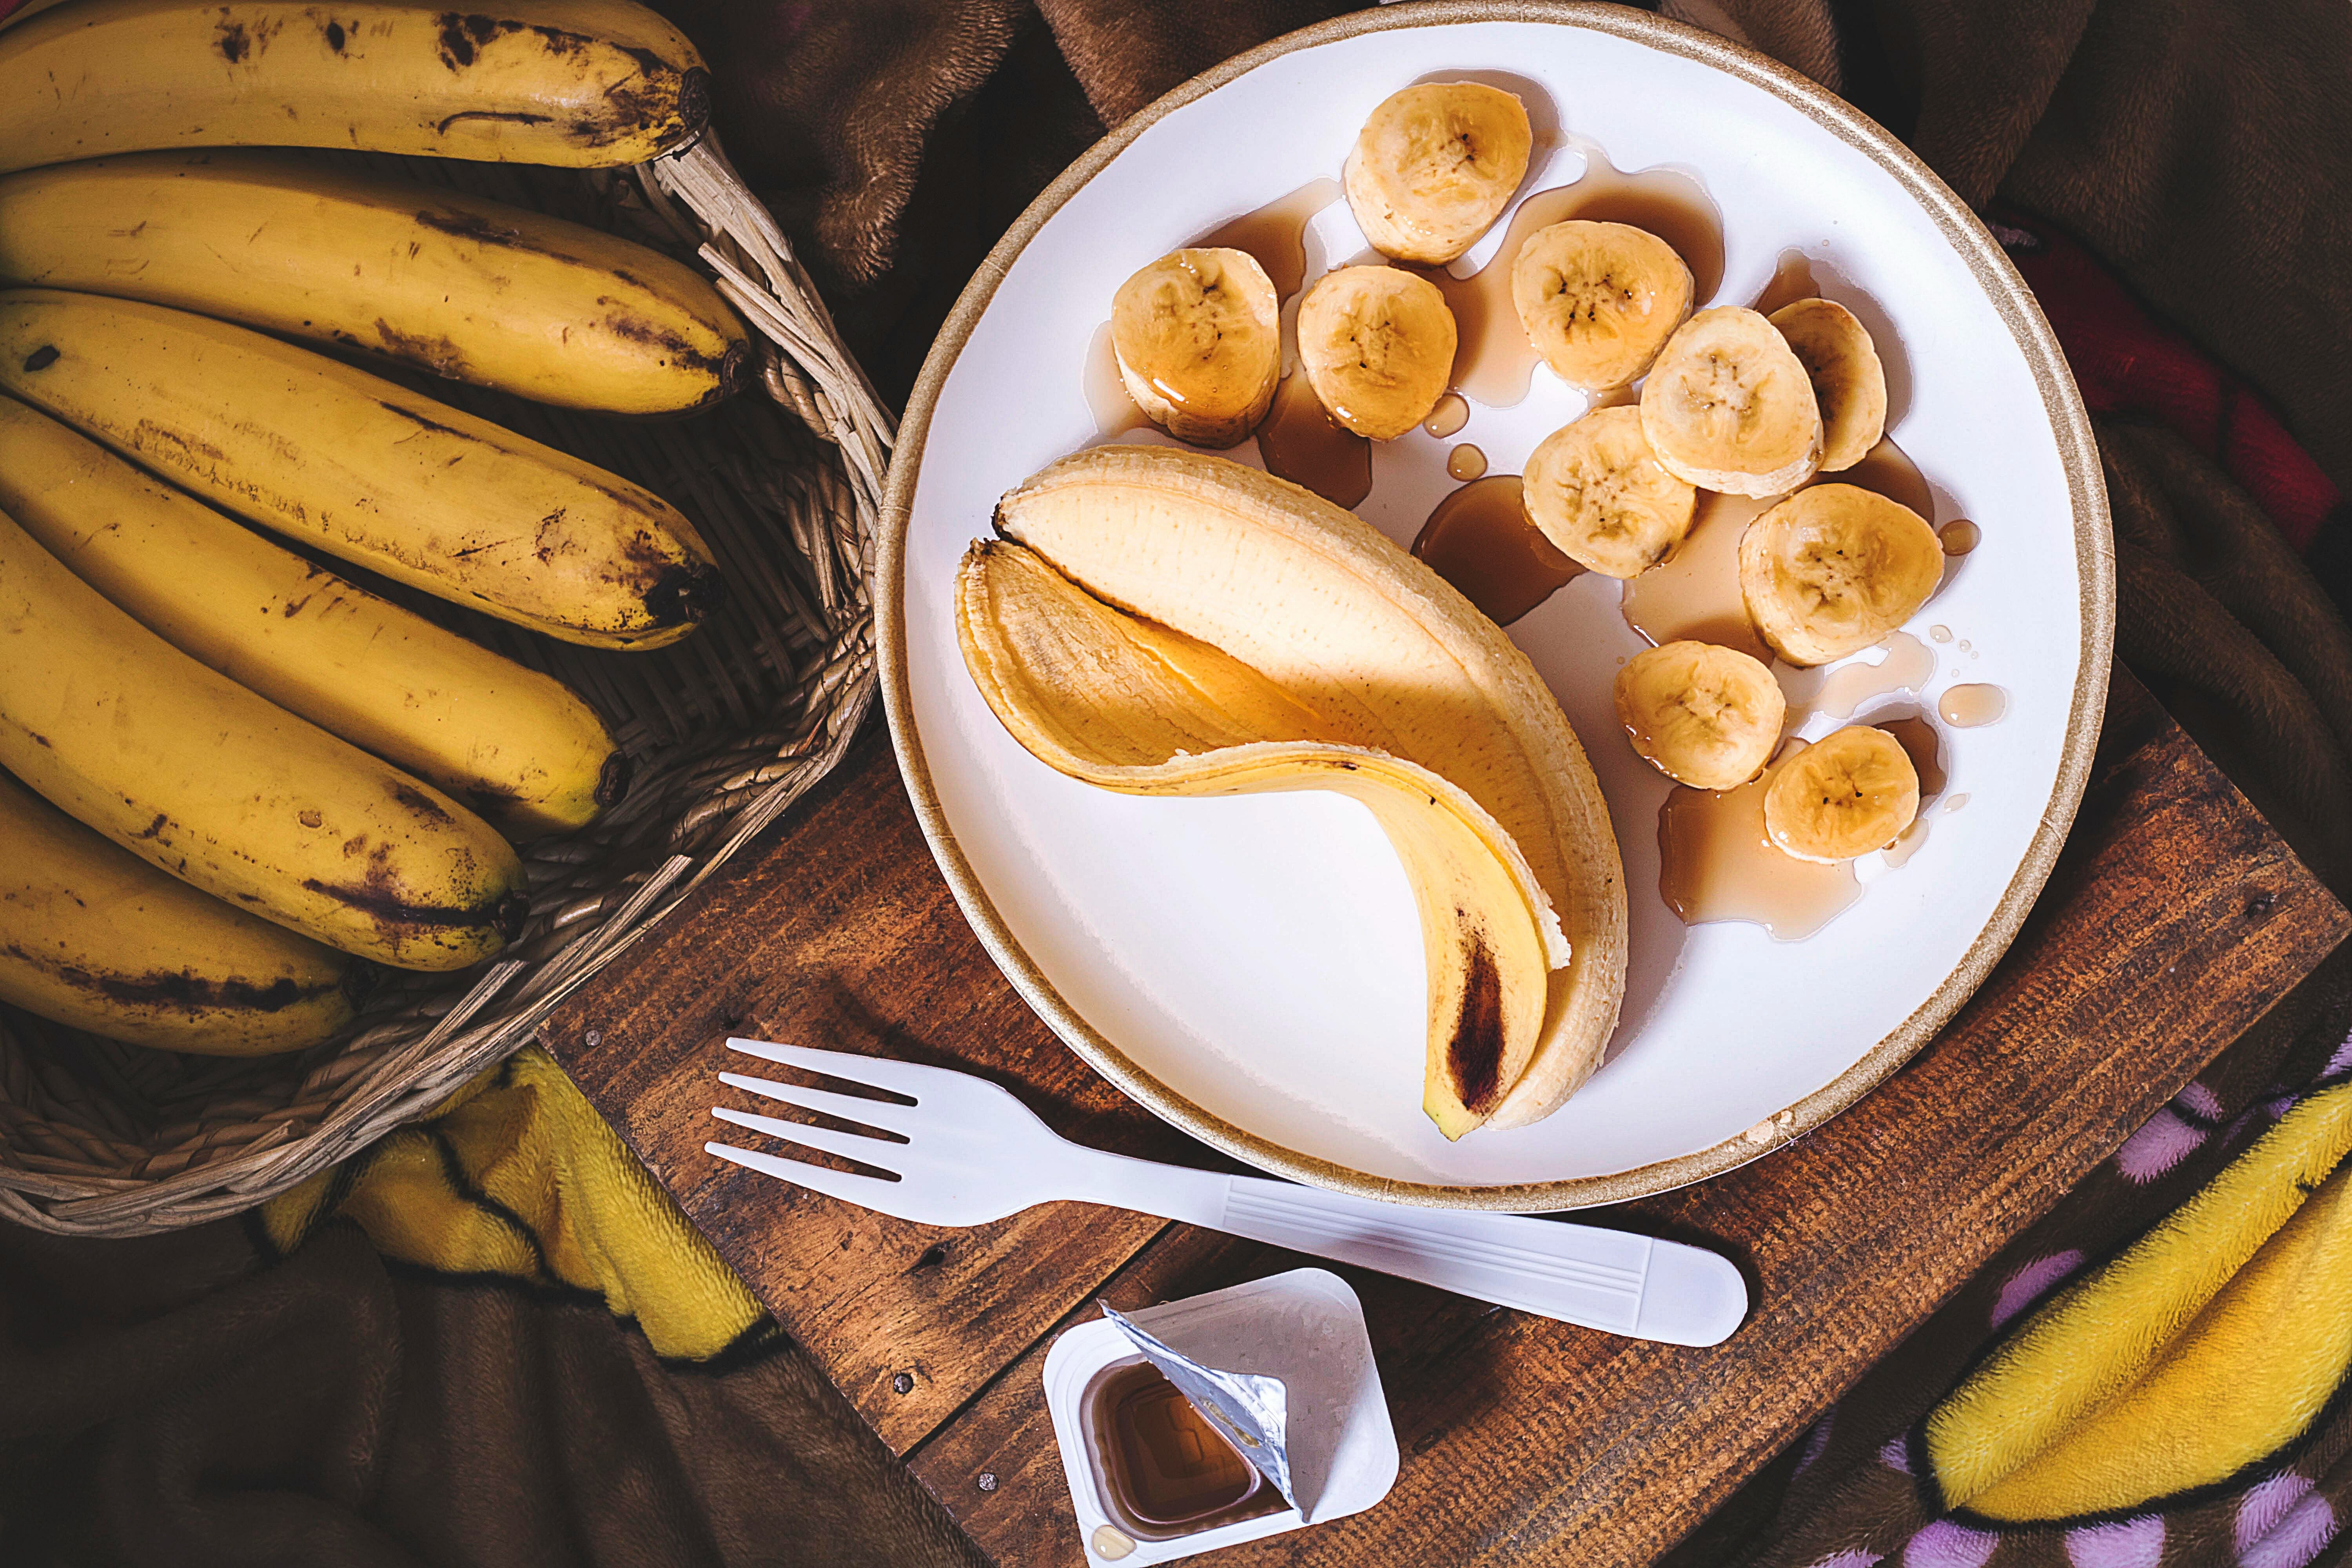 How To Store Bananas: 5 Simple Tips